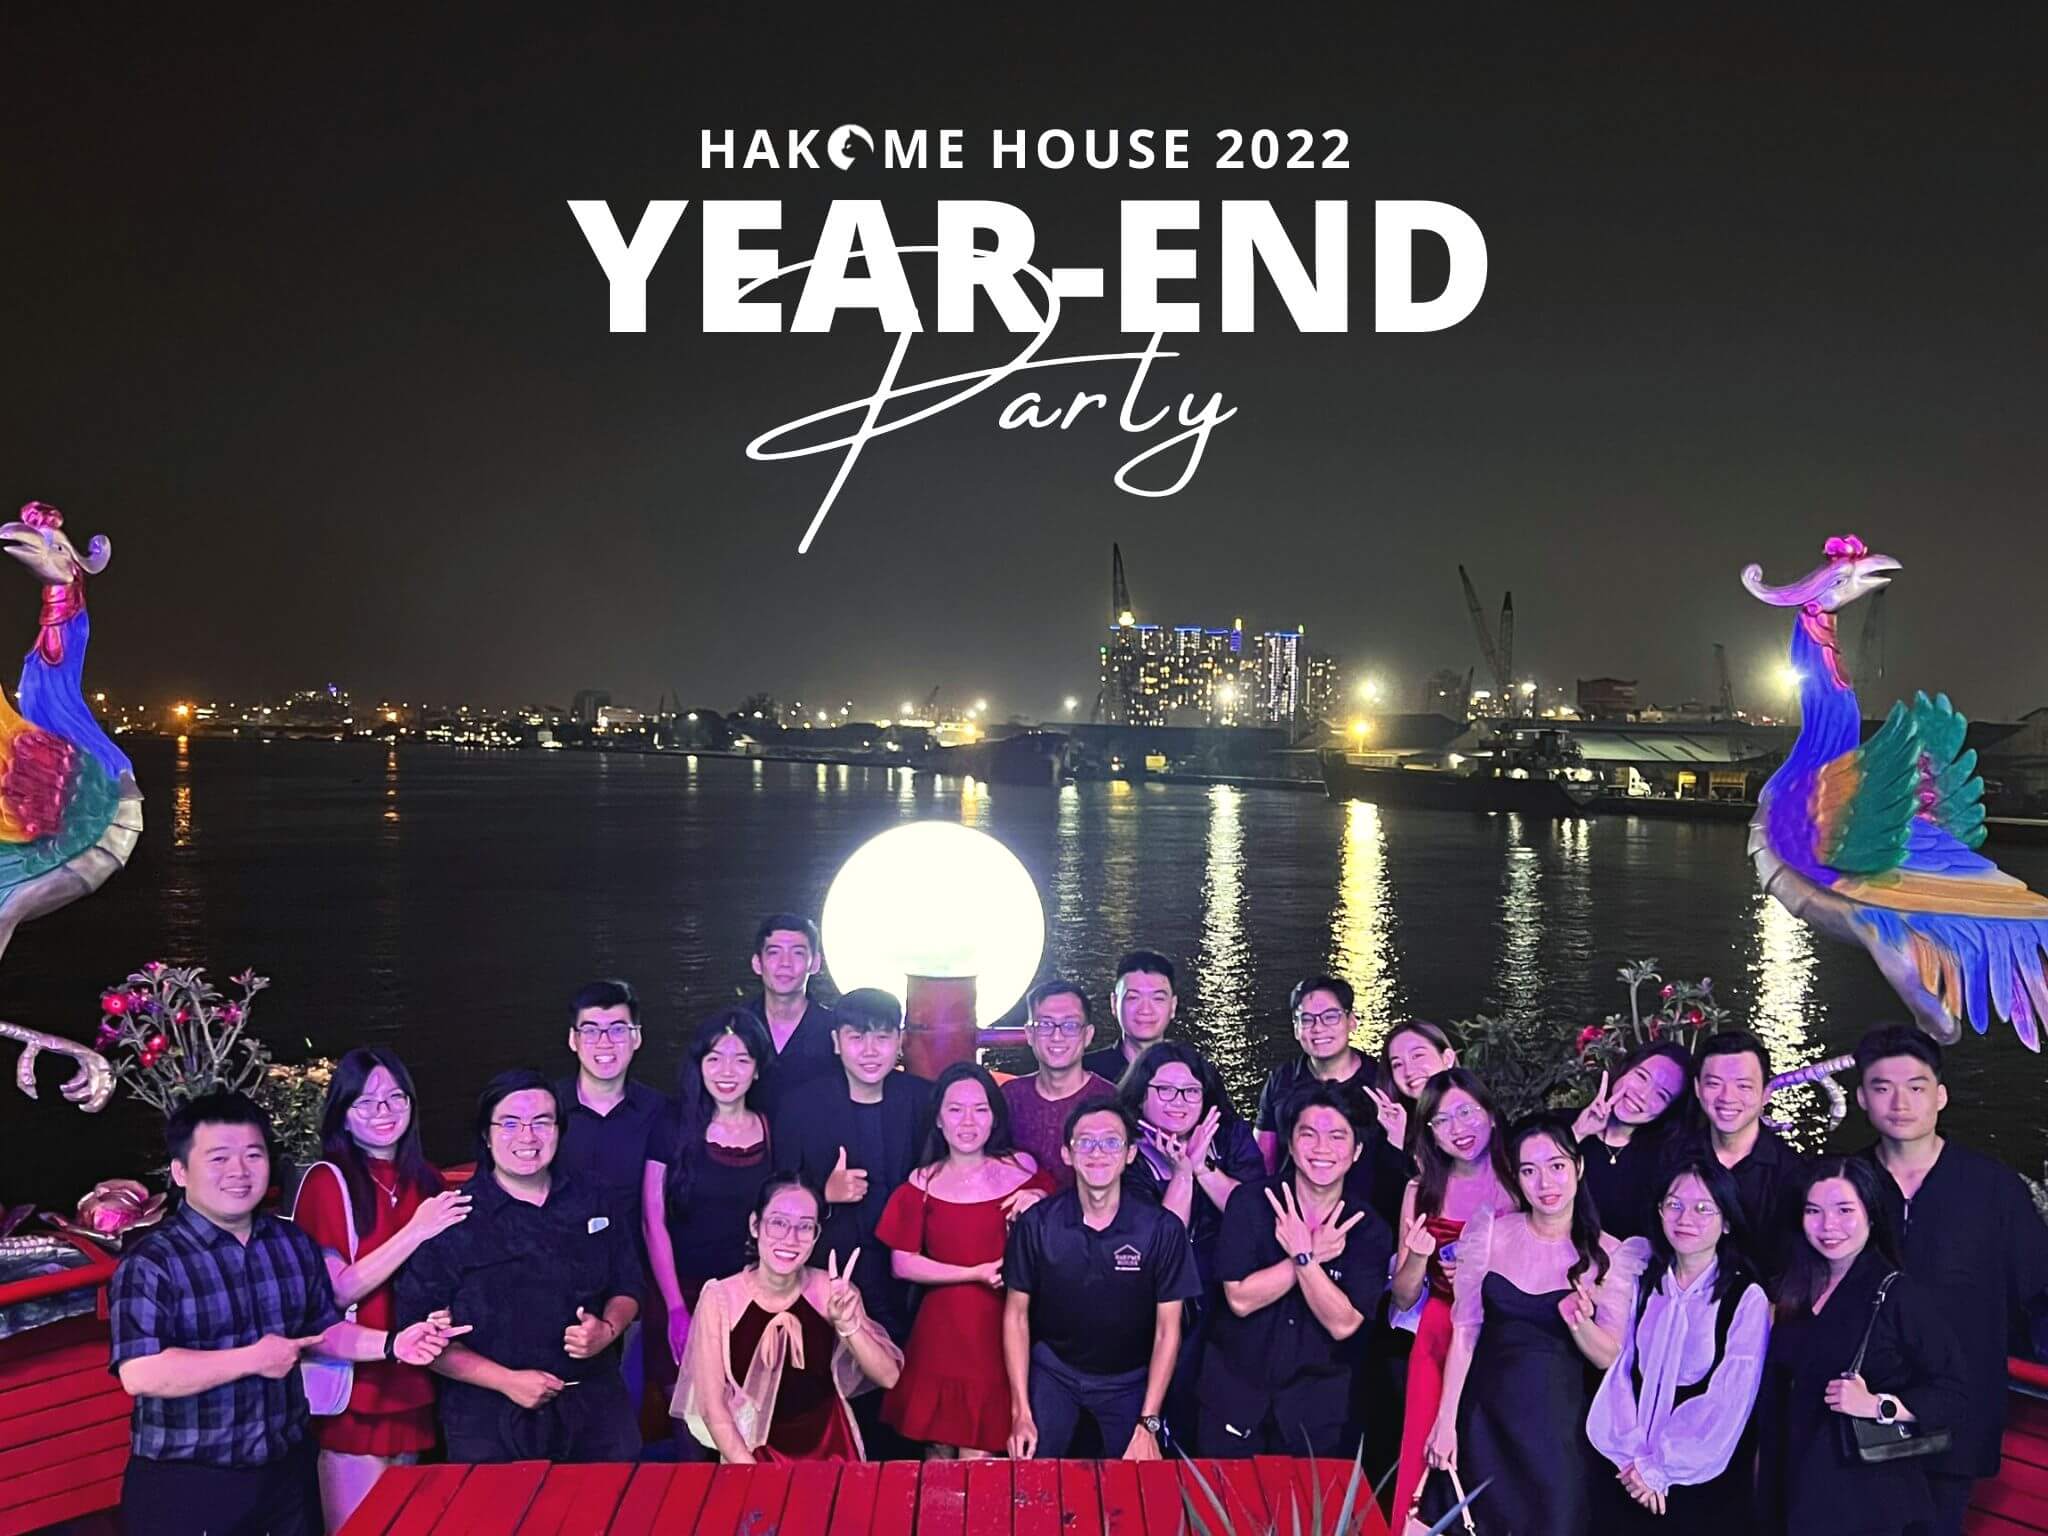 Year End Party Hakome House 2022